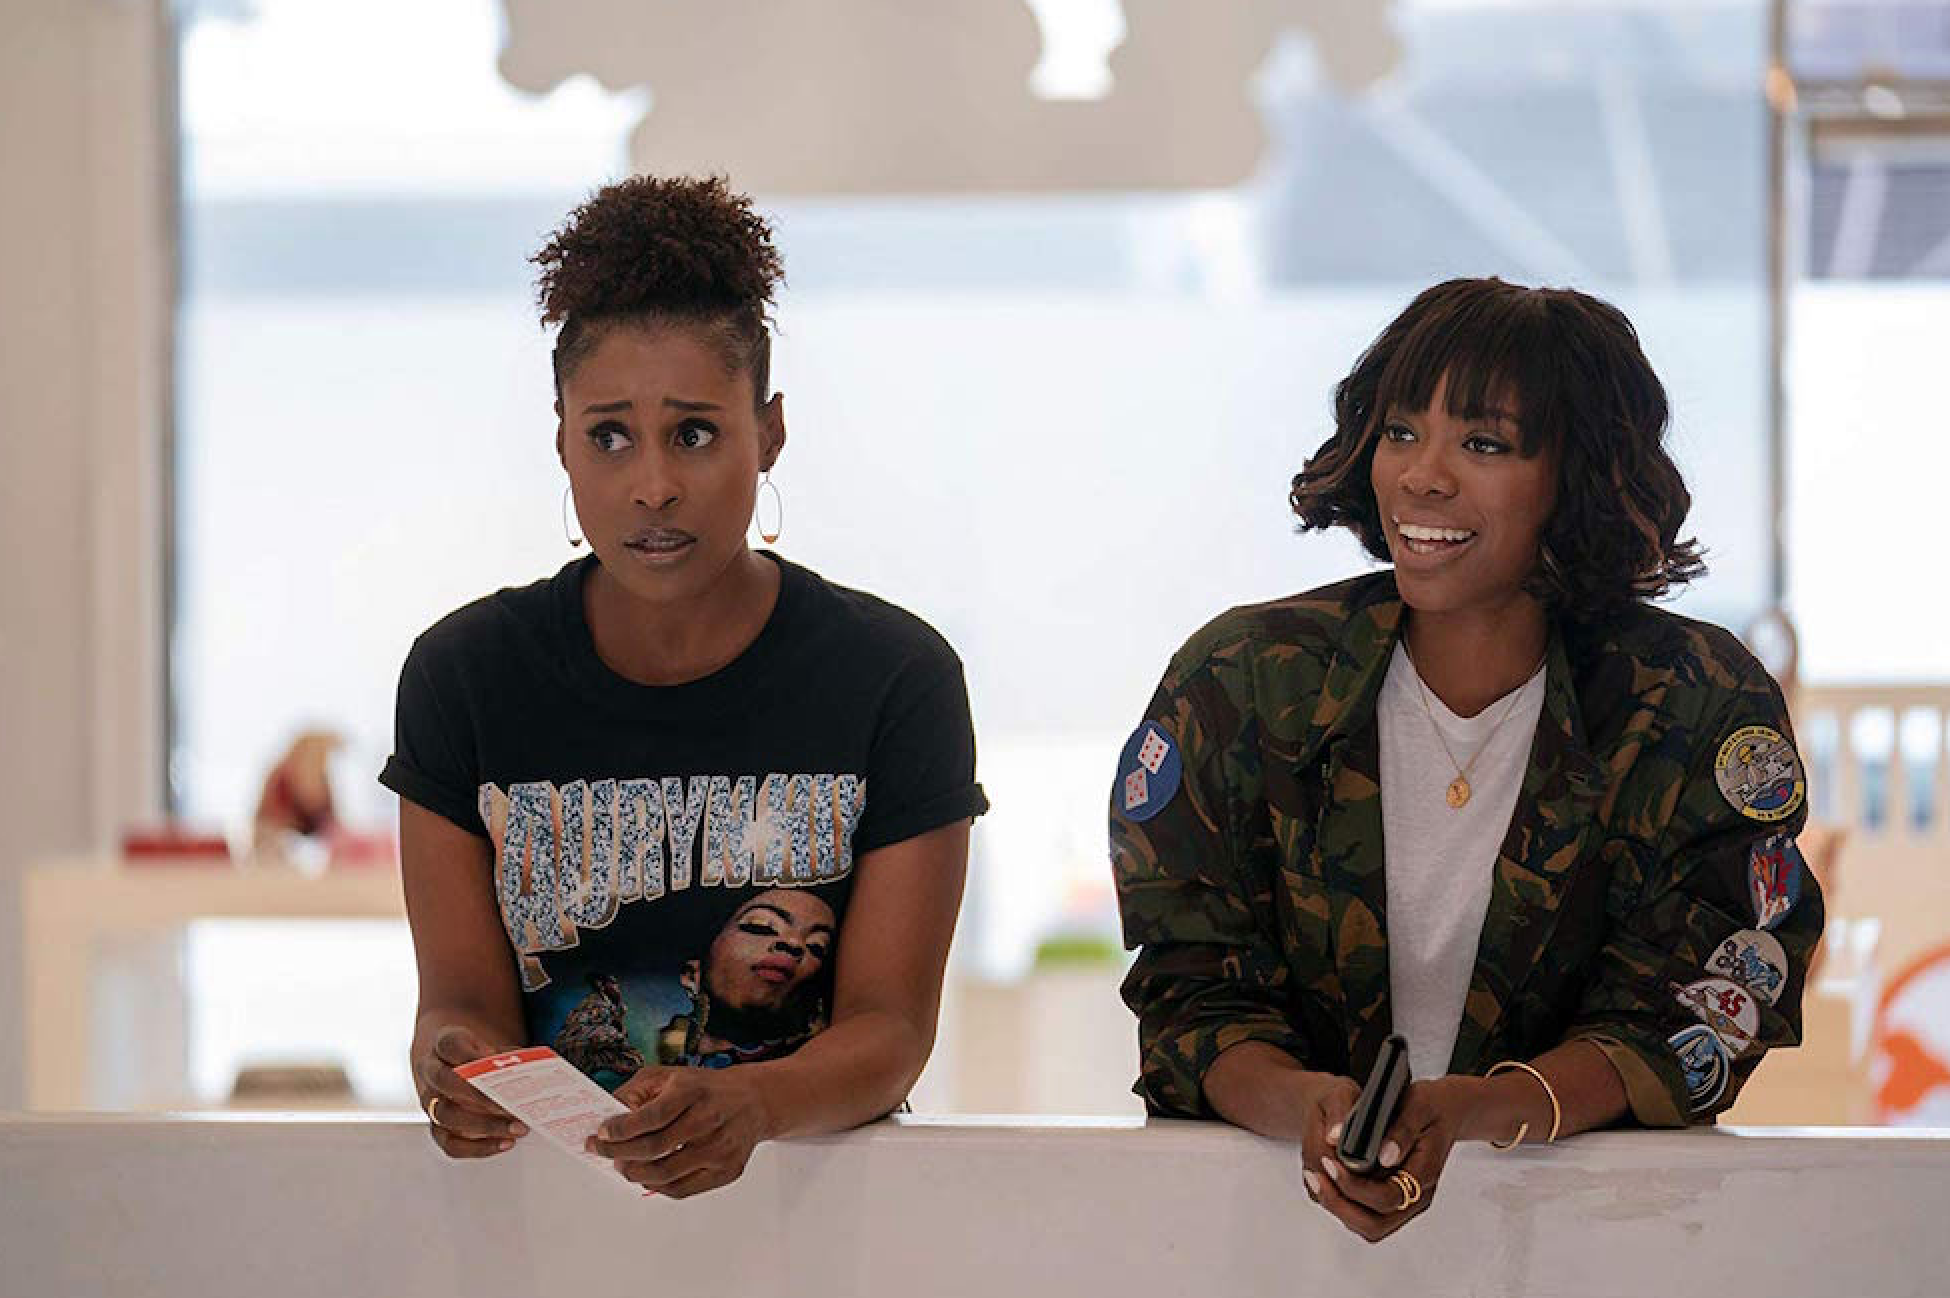 Everything You Need To Know Before You Watch The Season Three Premiere Of 'Insecure'